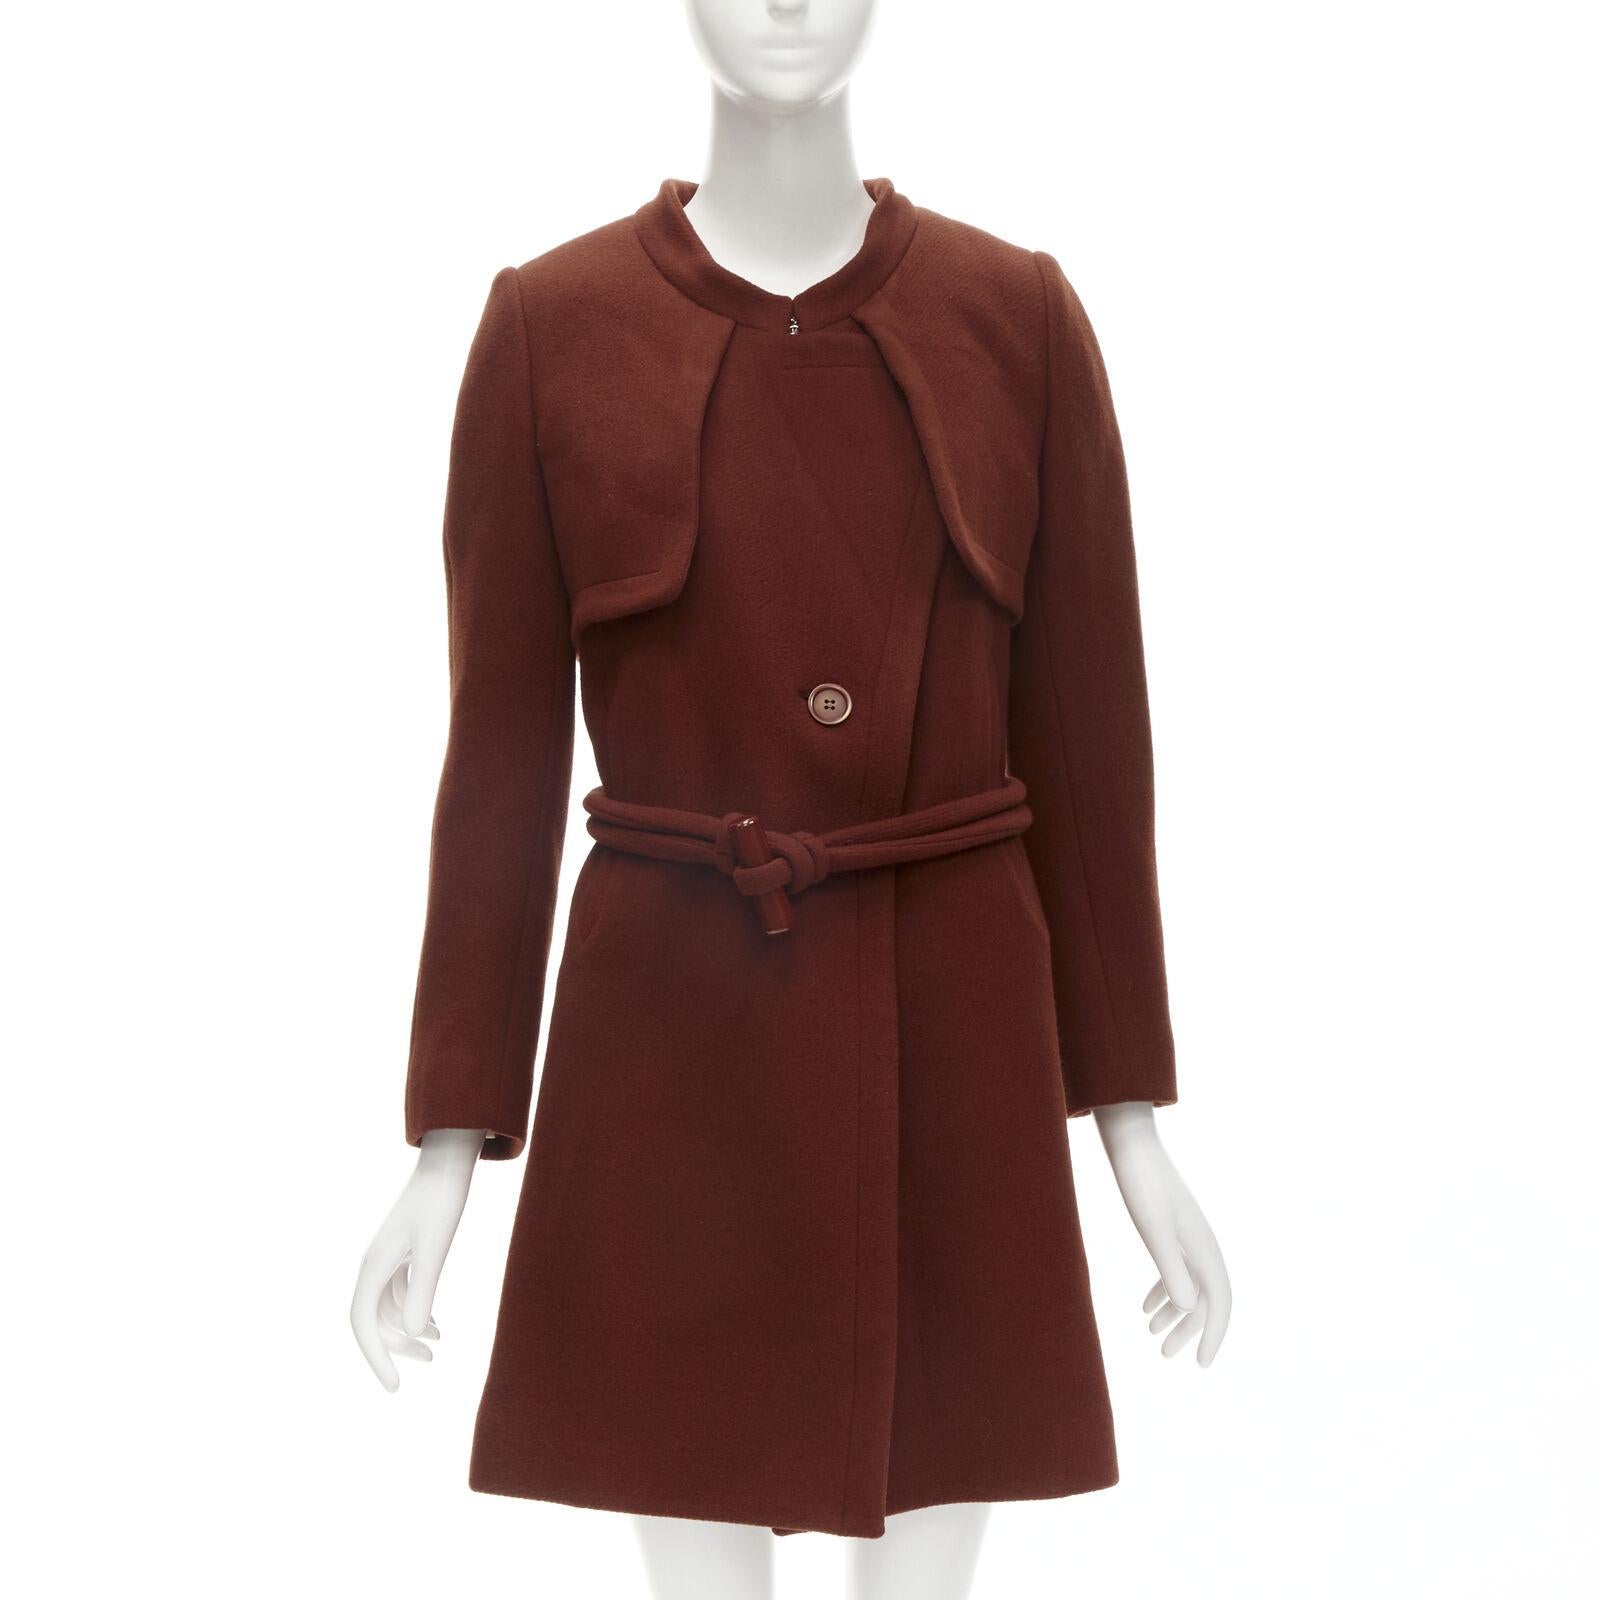 CHLOE 2015 brick red wool toggle belt long coat FR38 M
Reference: CNLE/A00200
Brand: Chloe
Collection: Pre Fall 2015
Material: Wool
Color: Brown, Multicolour
Pattern: Solid
Closure: Button
Lining: Polyester
Extra Details: Pre-Fall 2015 collection.